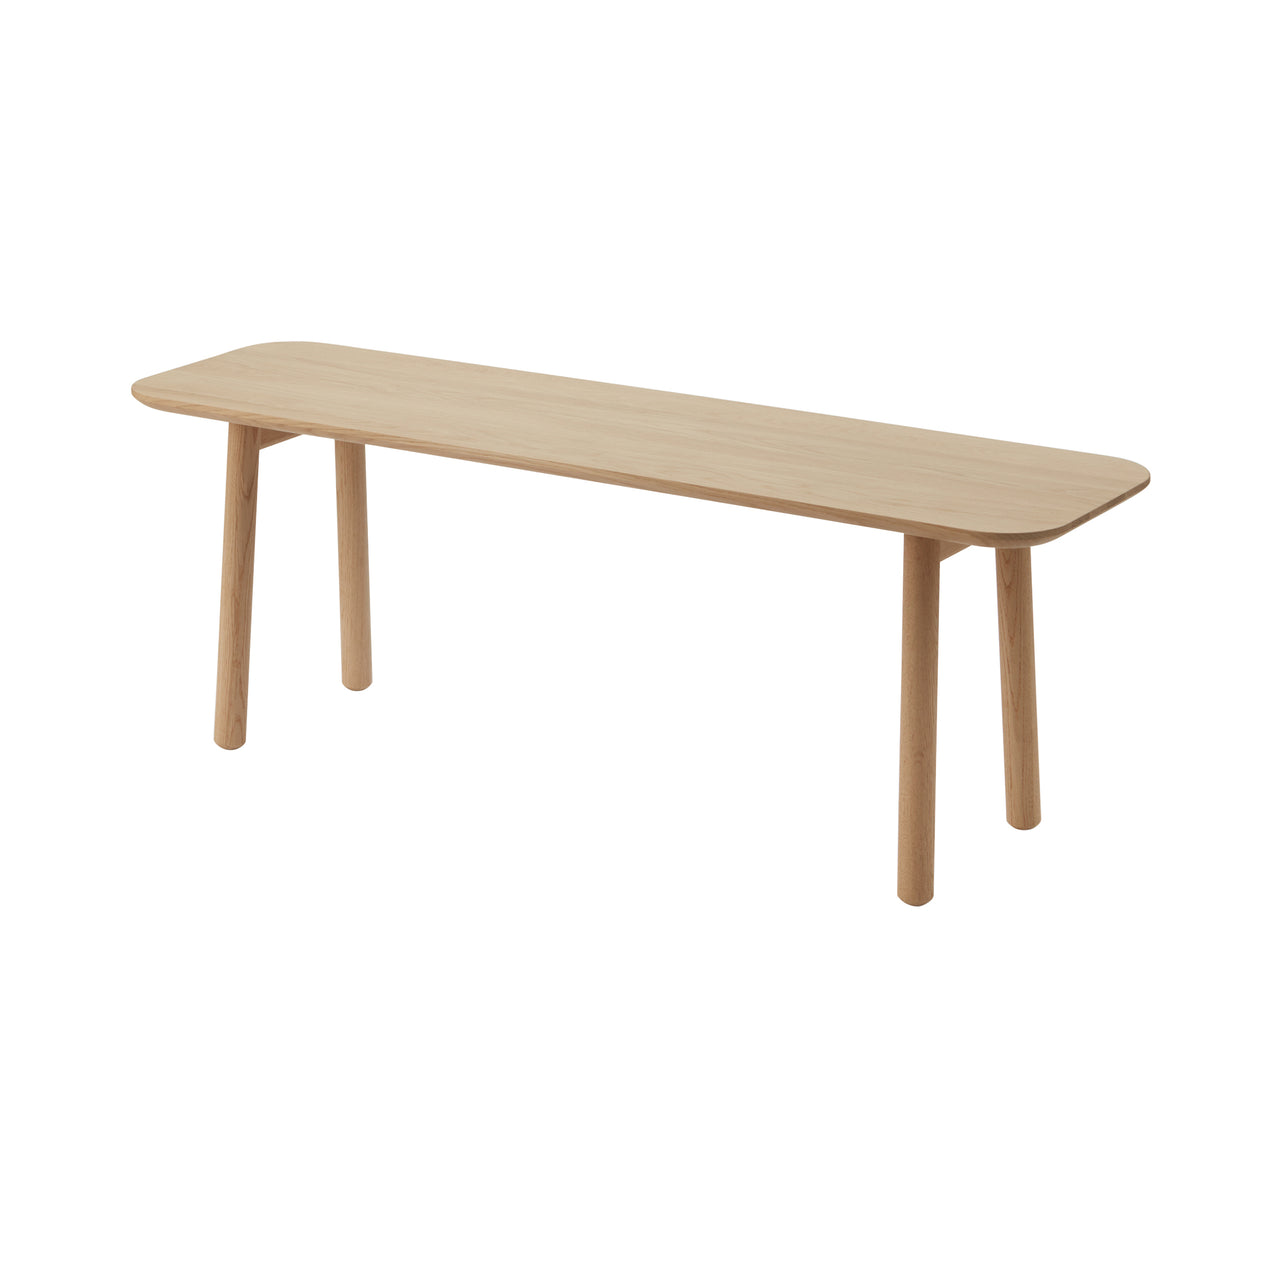 Hven Bench: Without Cushion + Oak